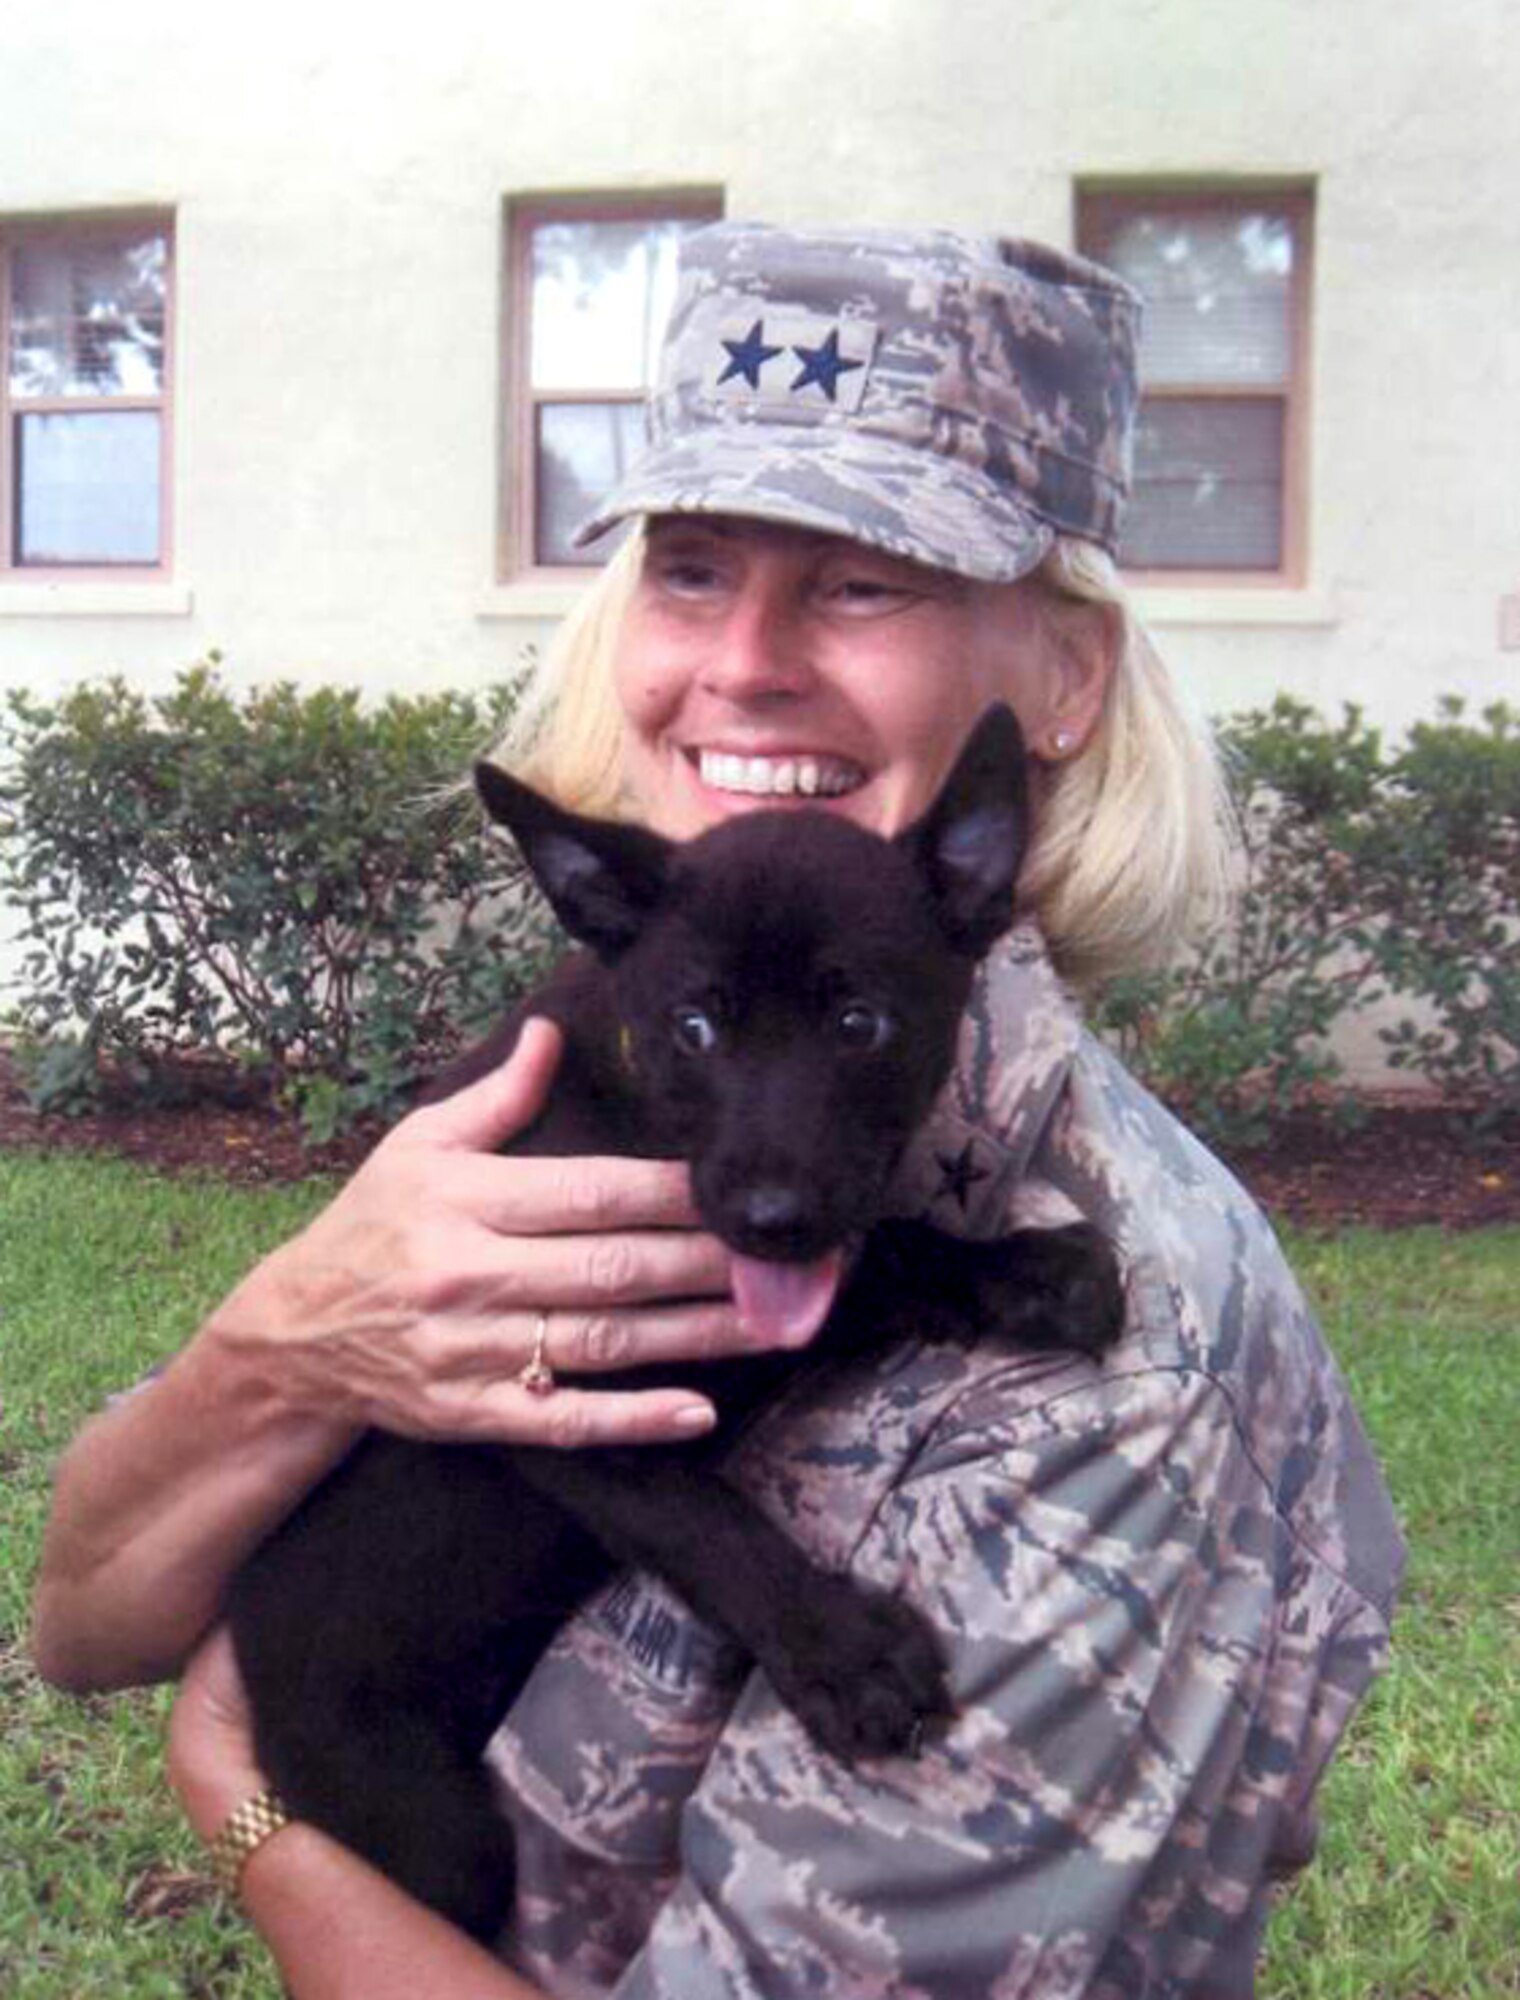 Maj. Gen. Mary Kay Hertog holds a Security Forces military working dog puppy.  (Courtesy photo)